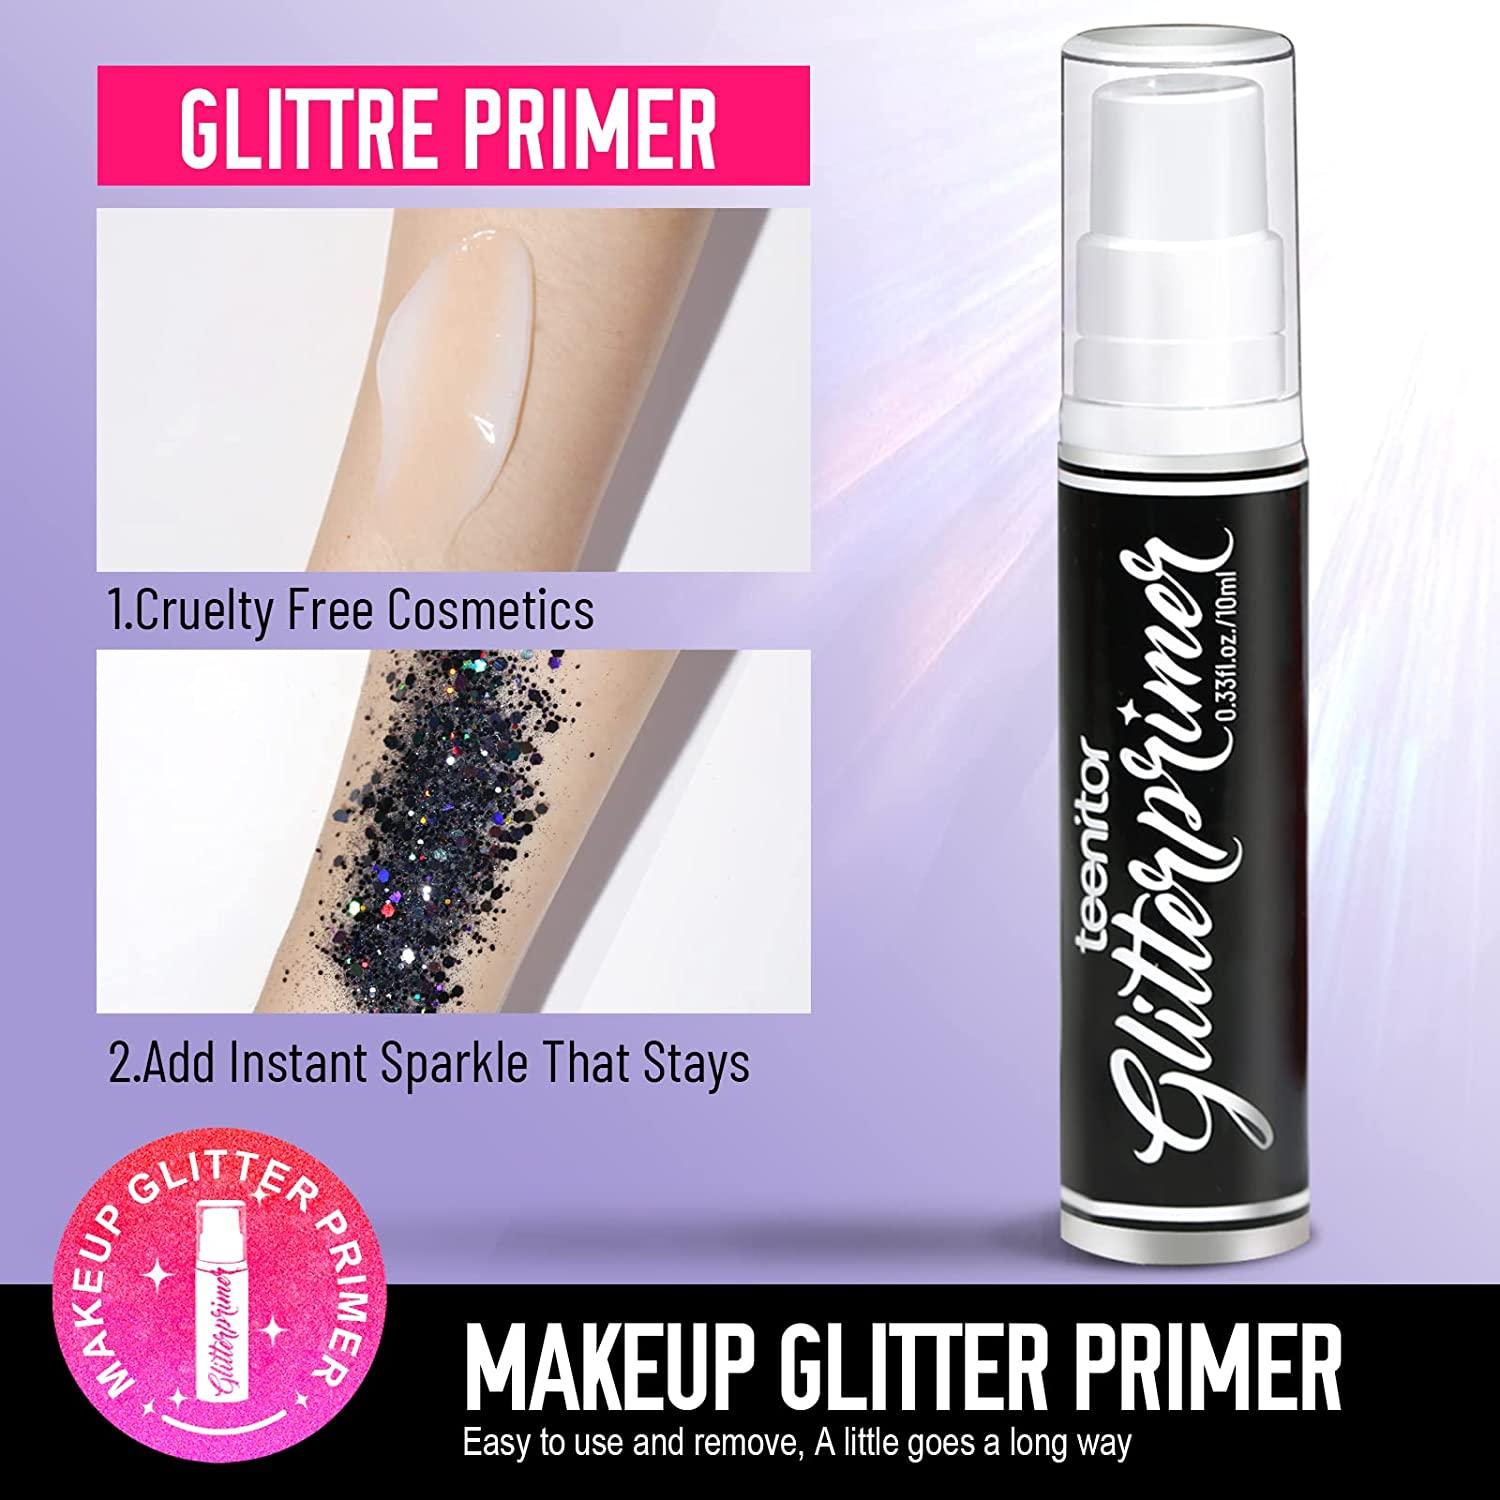 Here's How Much Should You Should Spend on Glitter Primer.